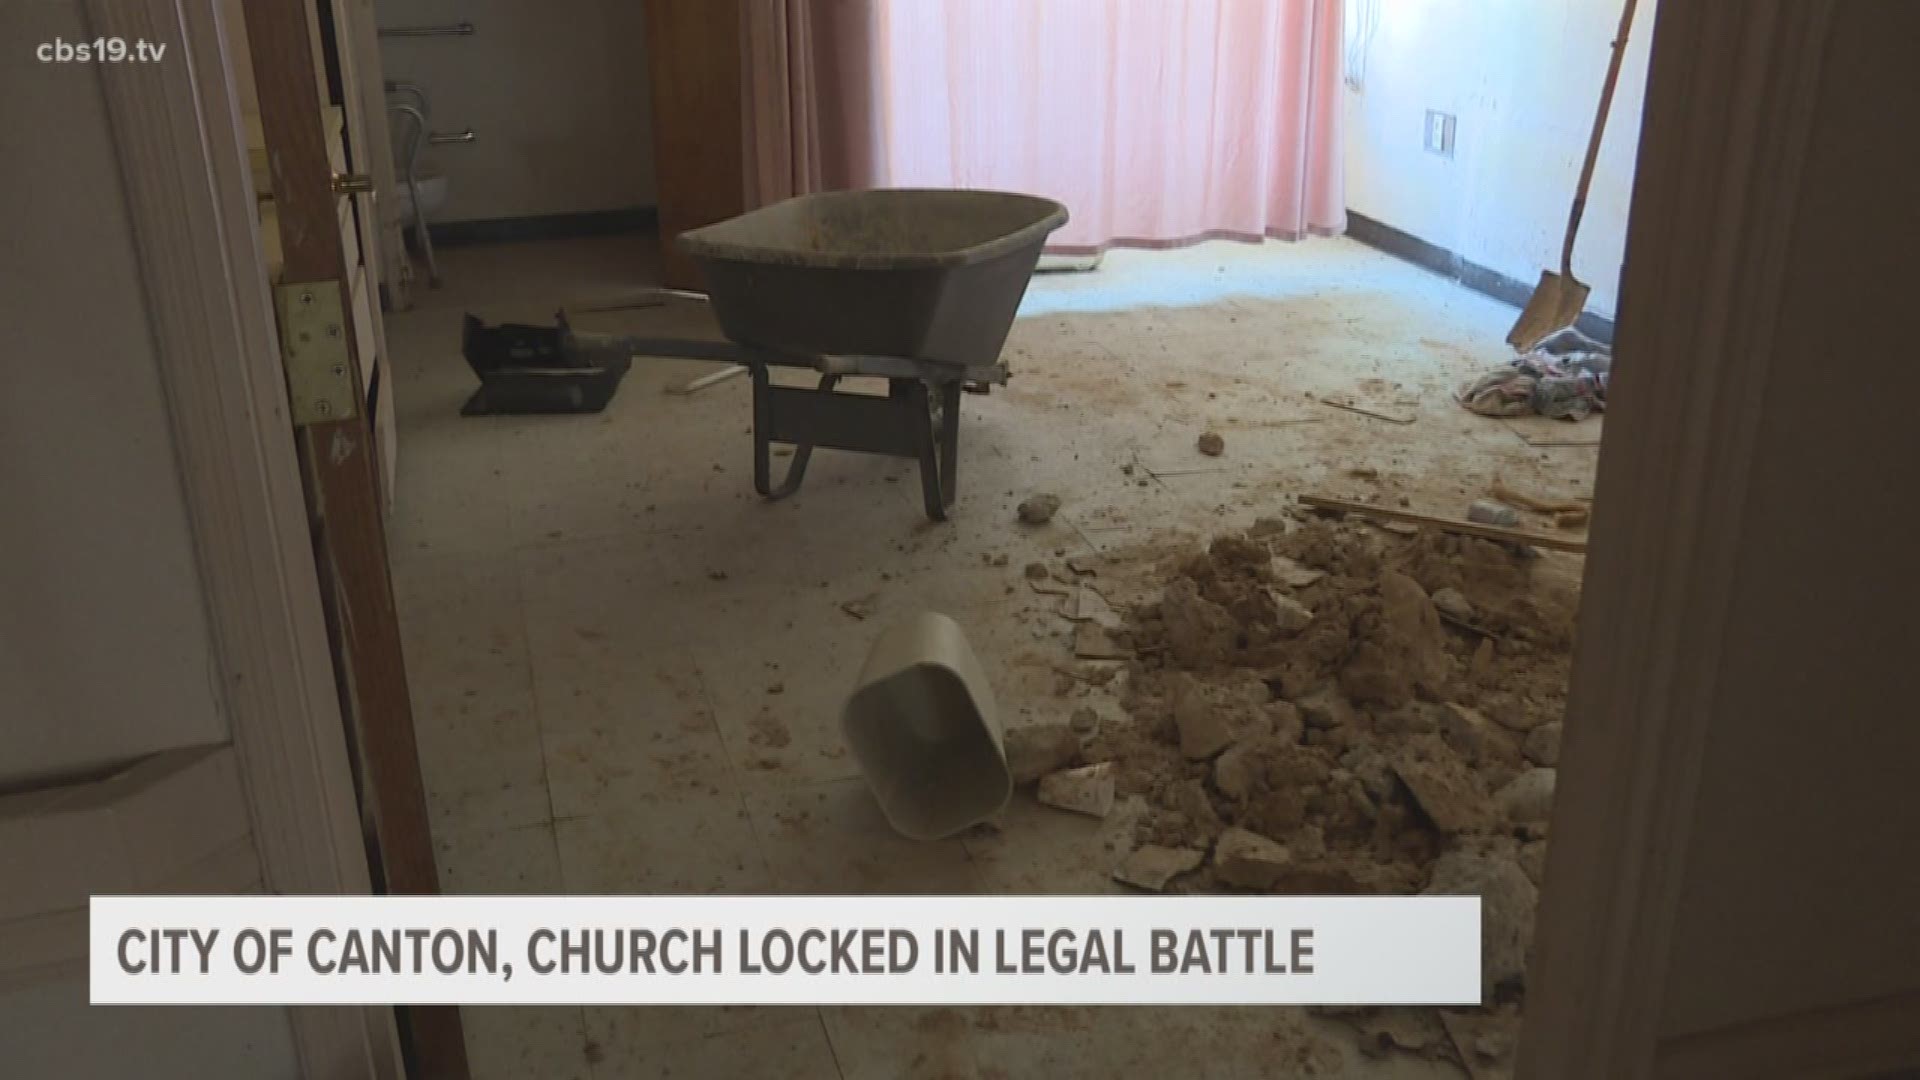 Both the city and church have filed suits against each other. The issue at hand is whether the building violated ordinances and if the building should be condemned.